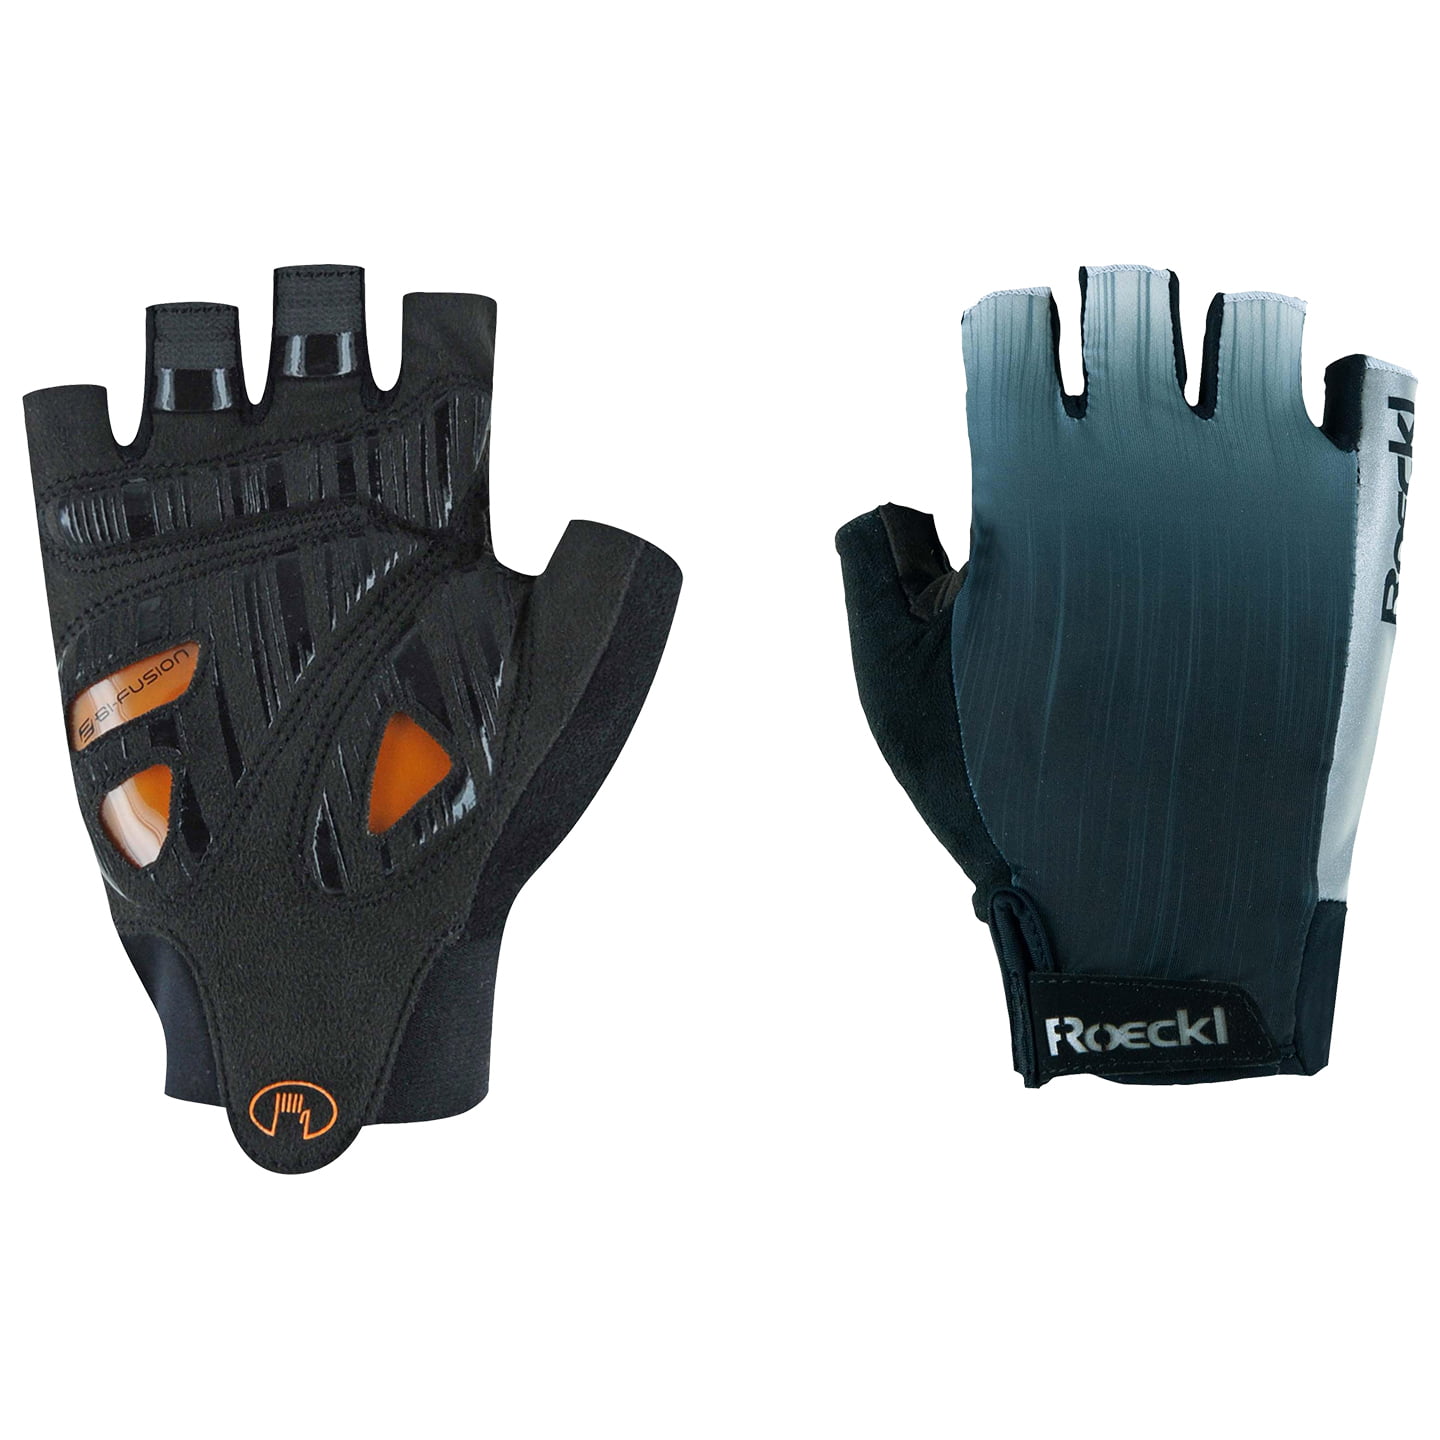 ROECKL Illasi MTB Gloves Cycling Gloves, for men, size 7,5, MTB gloves, MTB clothing